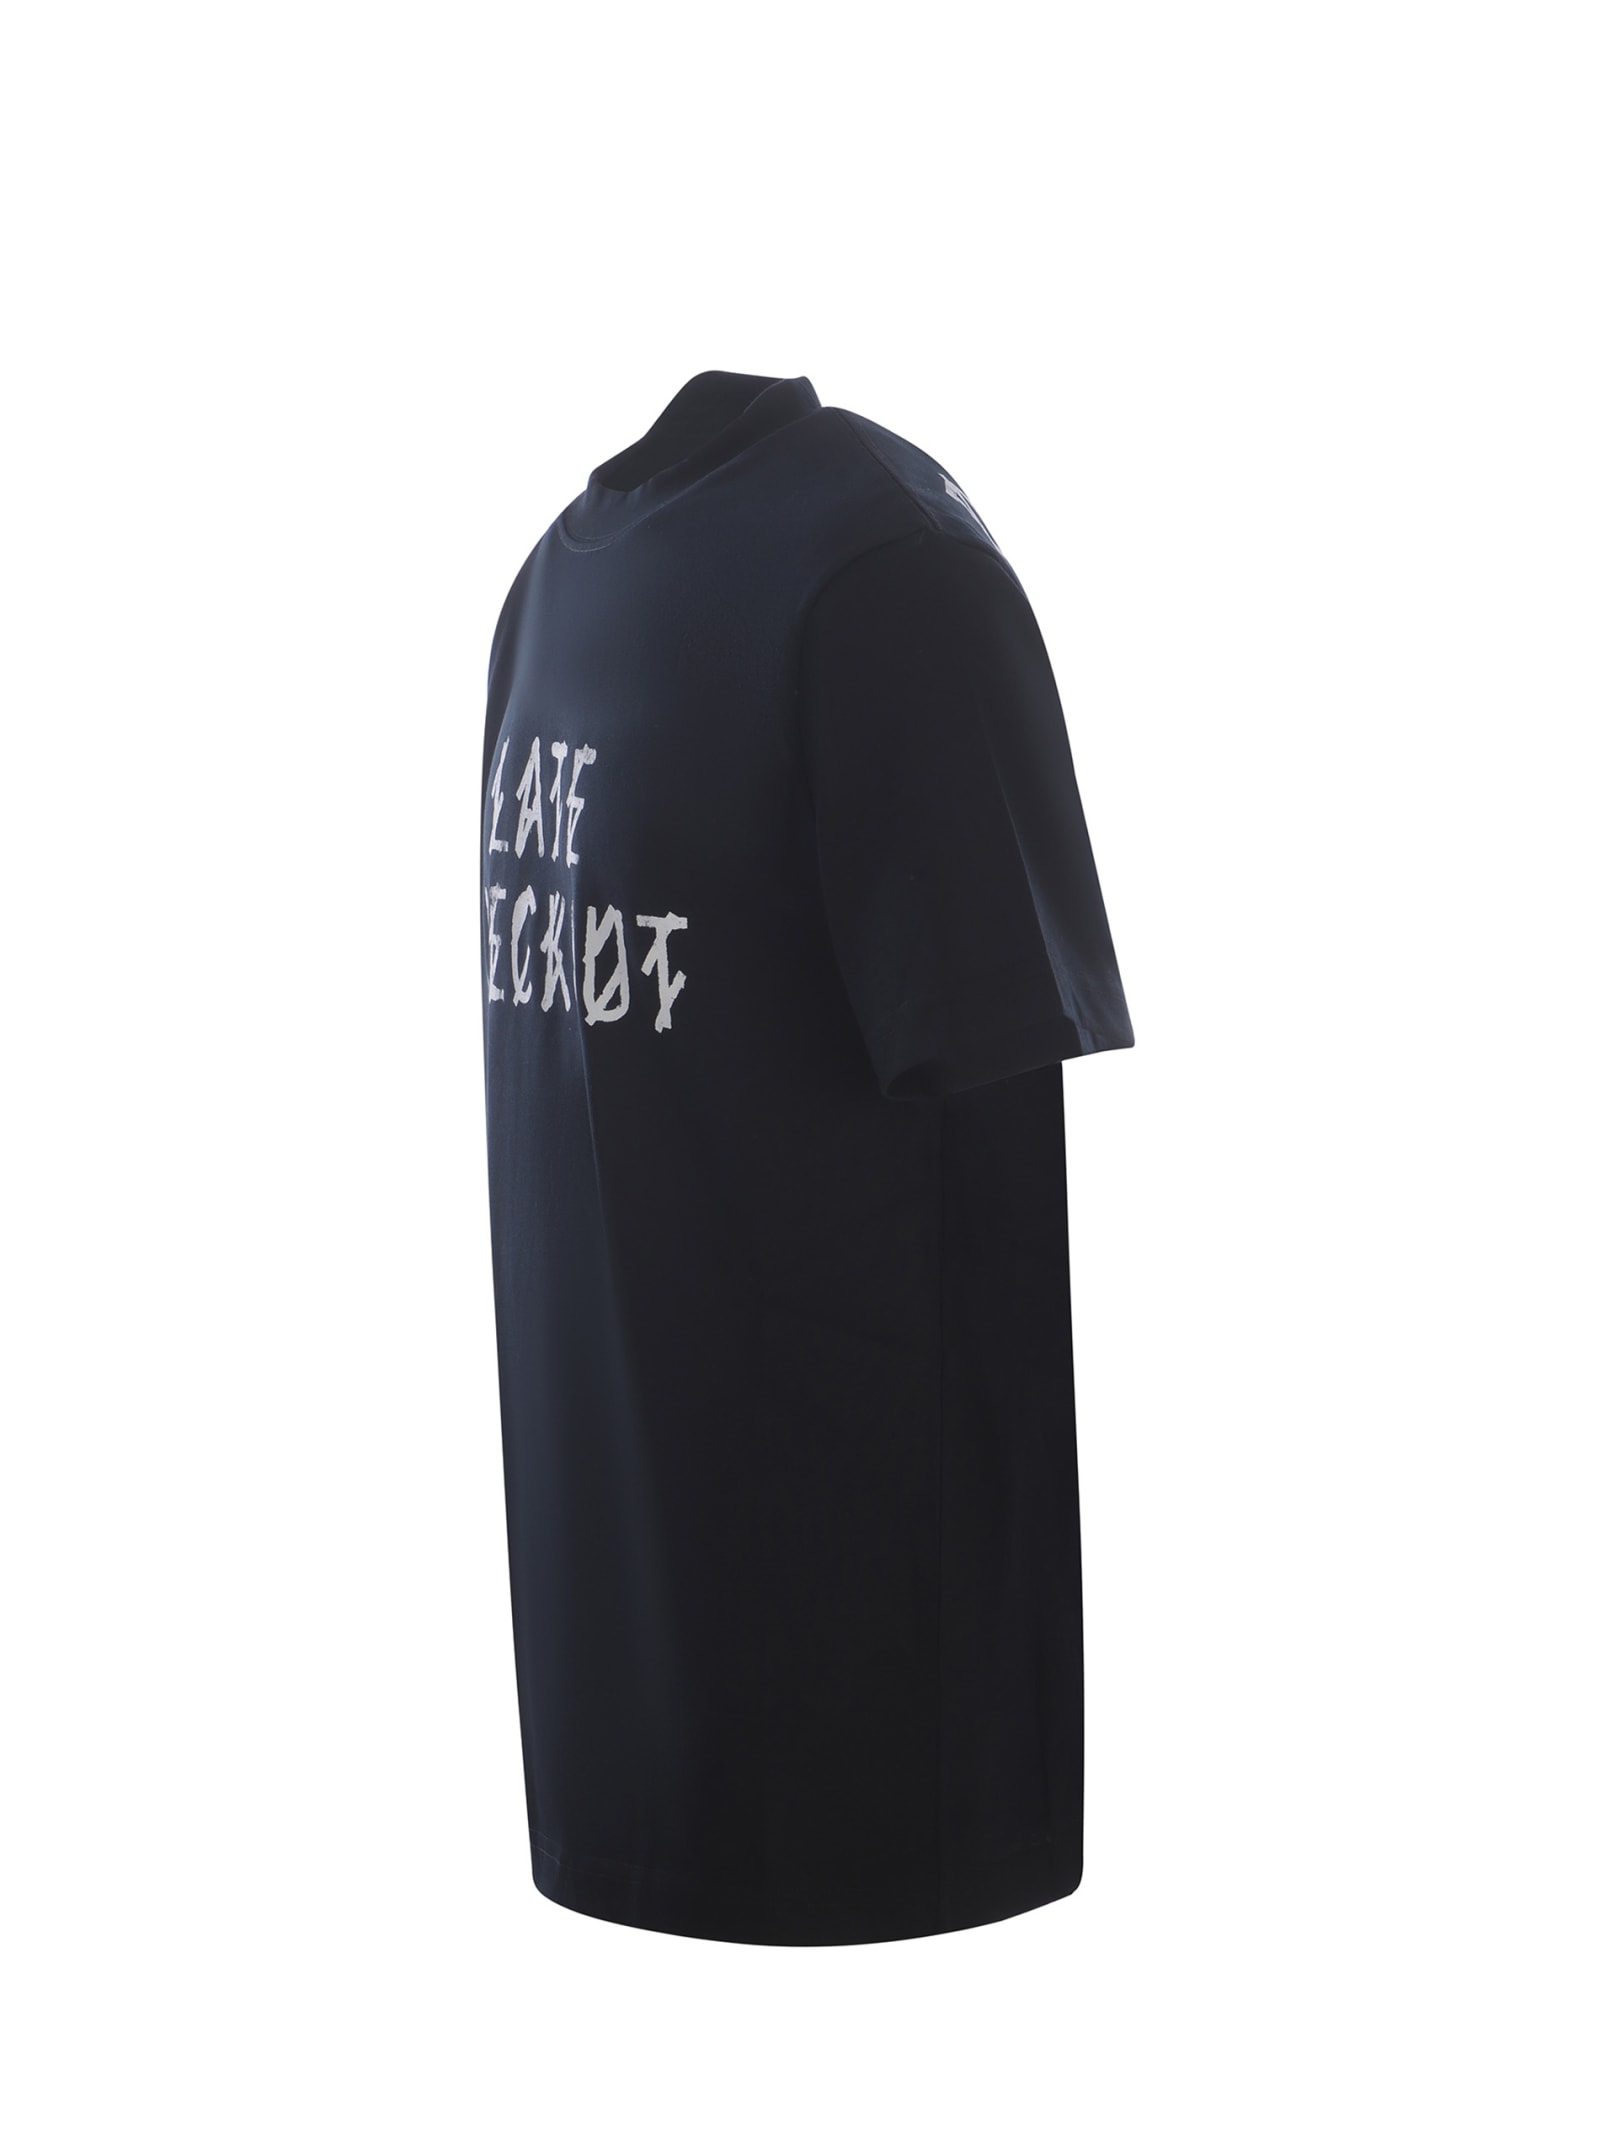 Shop 44 Label Group T-shirt  Made Of Cotton In Nero